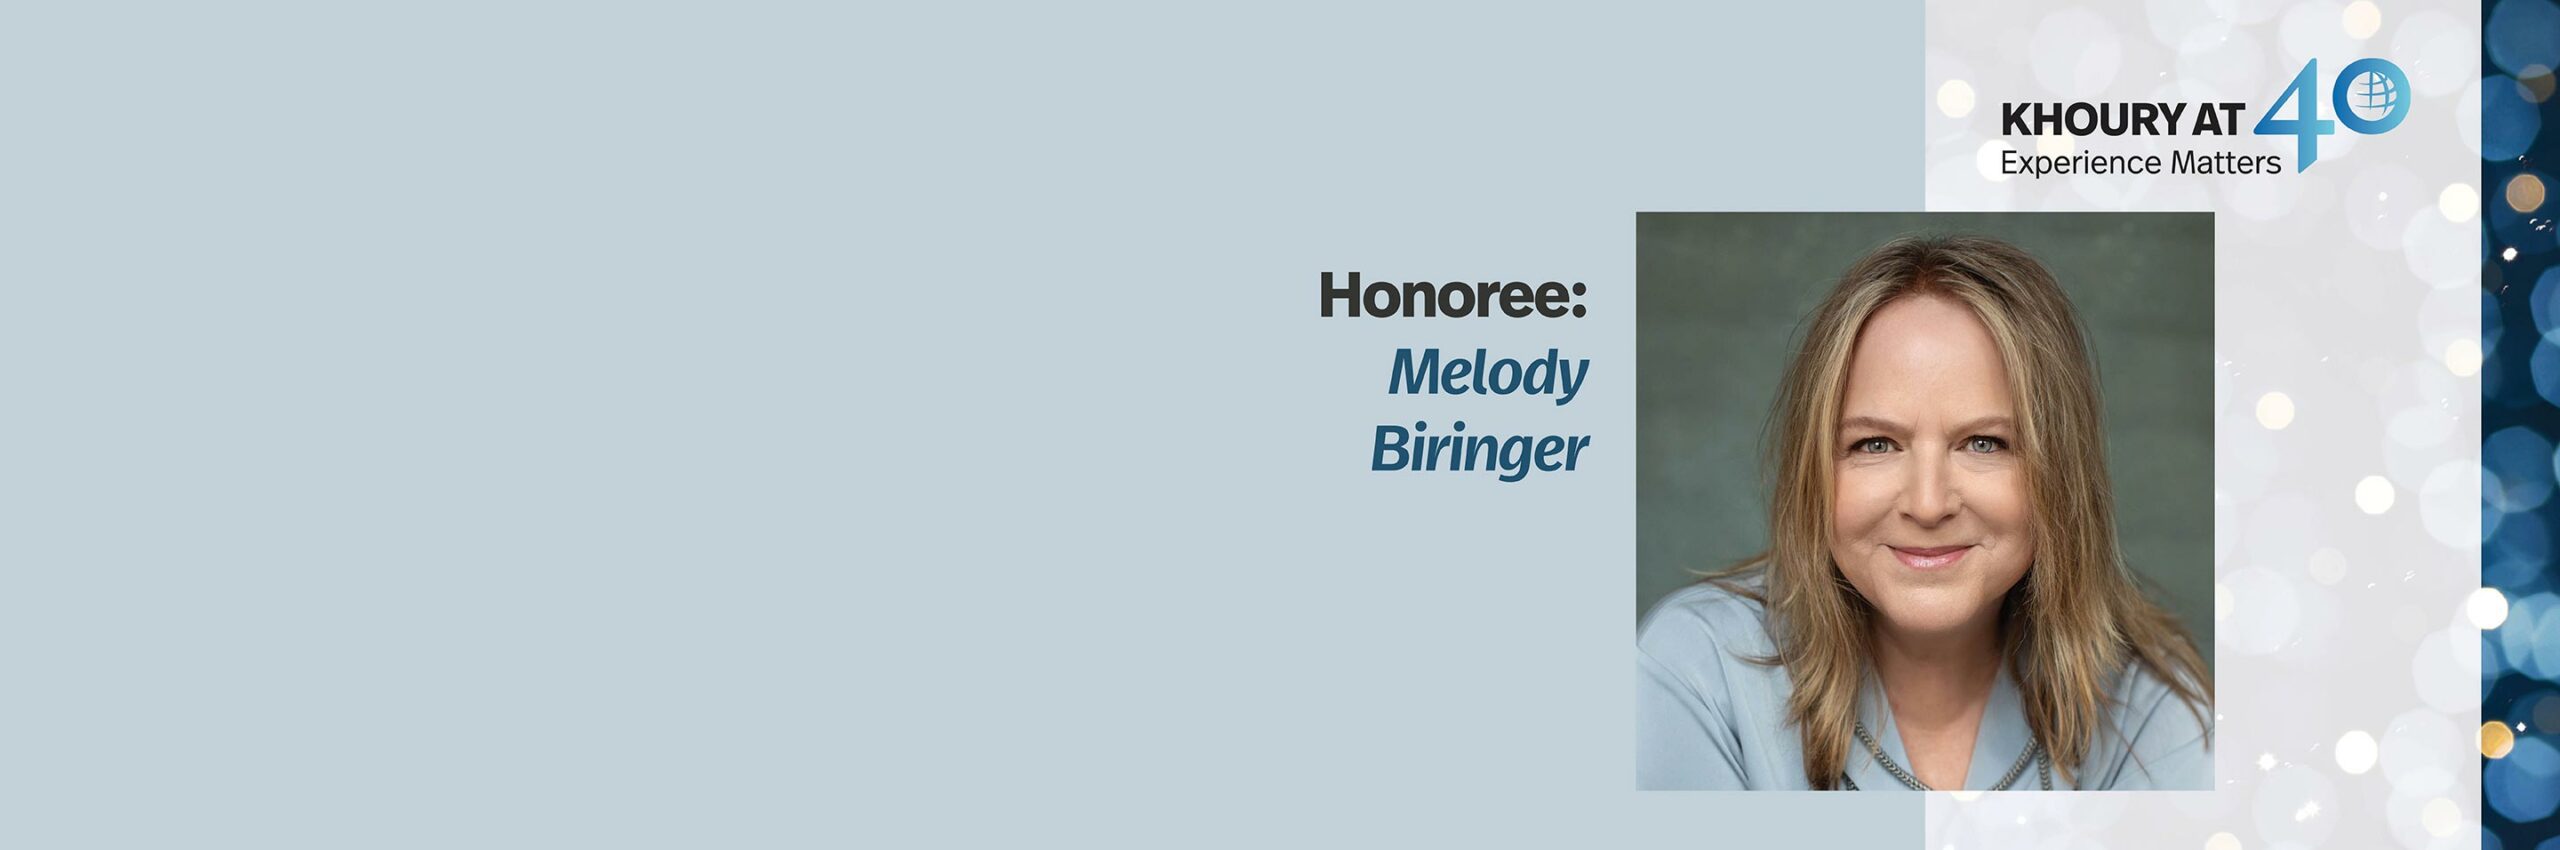 40 for 40 Honoree: Melody Biringer